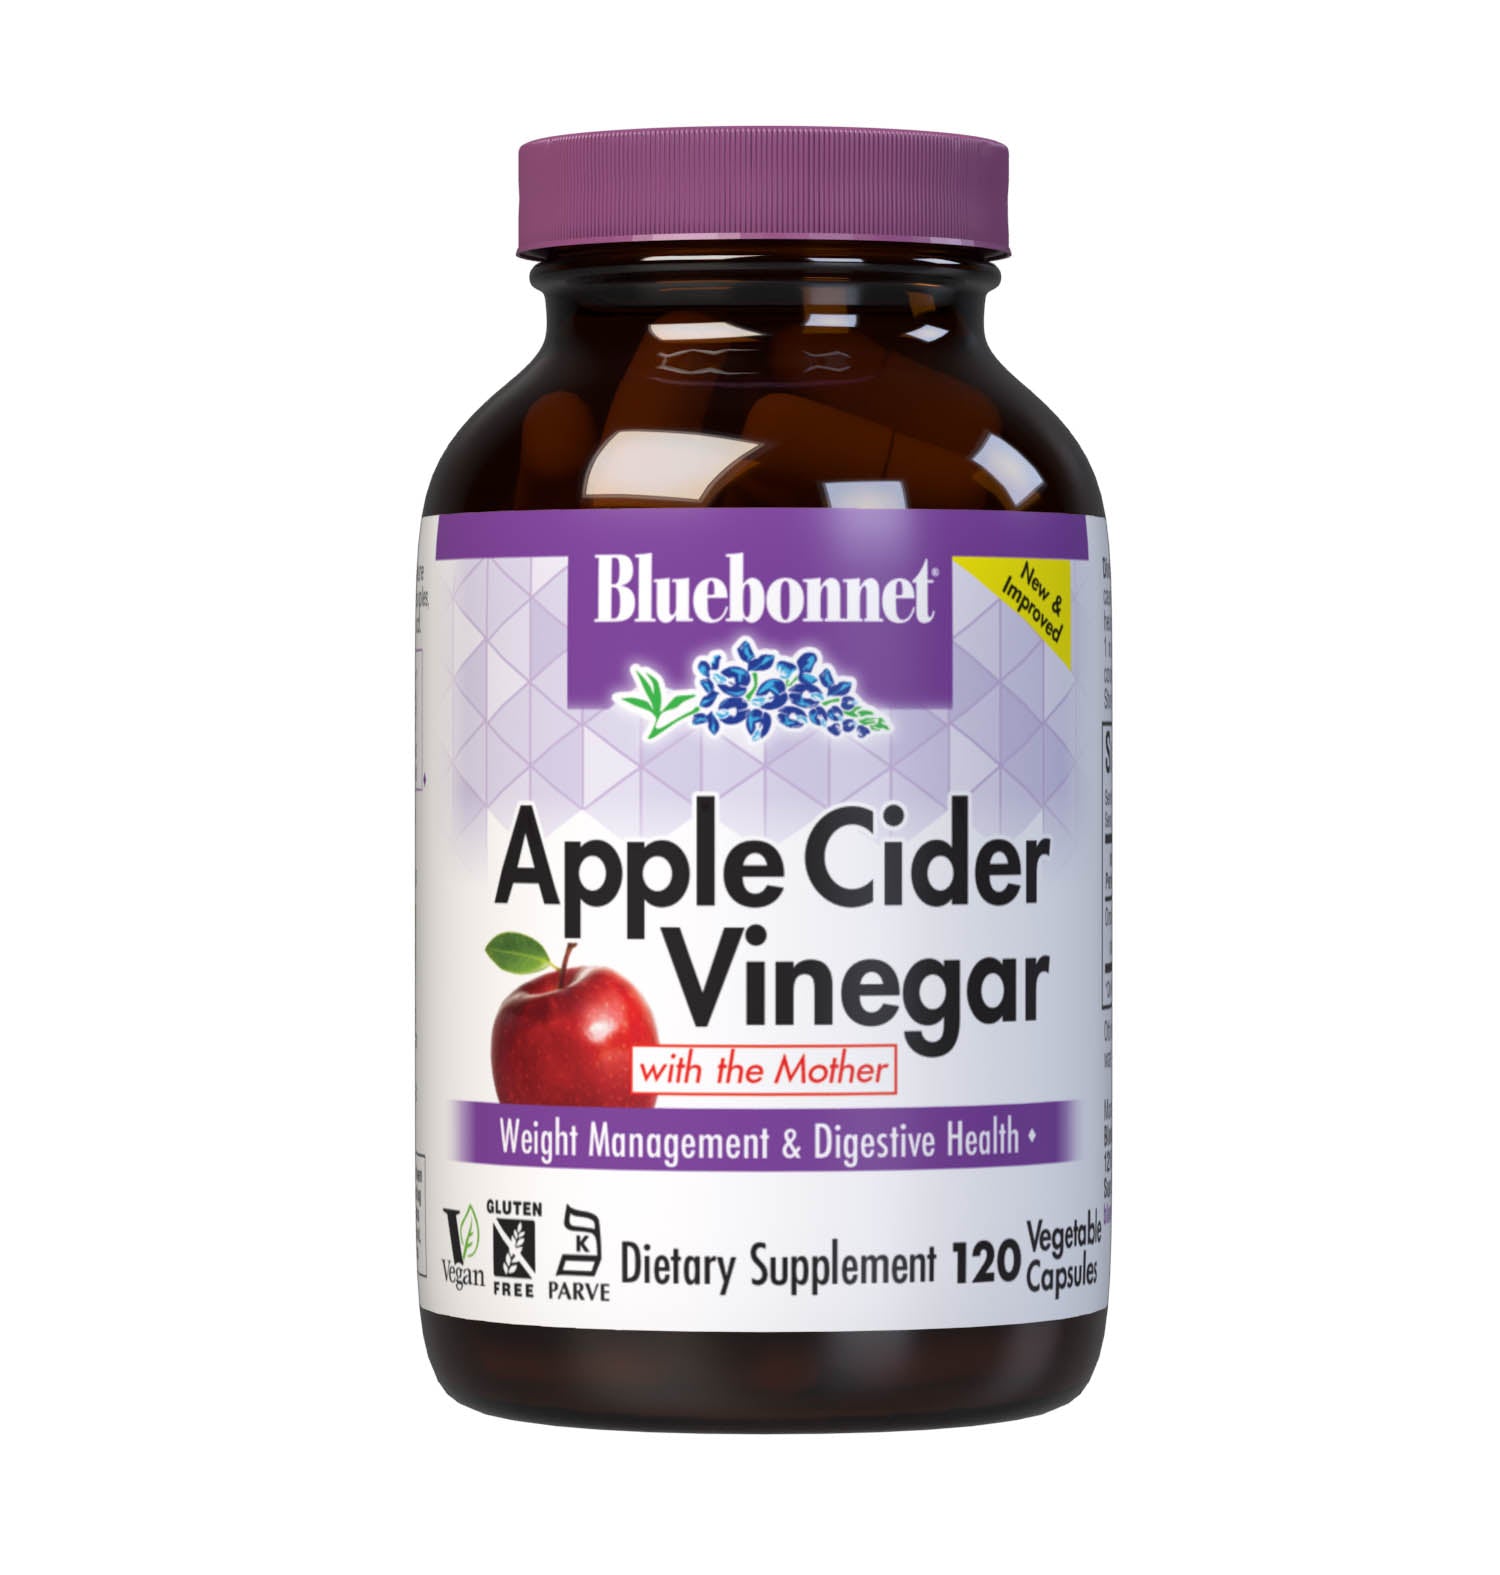 Bluebonnet’s Apple Cider Vinegar with the Mother 120 Vegetable Capsules are carefully crafted from cold-pressed juice of organic apples, which has been fermented and standardized for acetic acid to support weight management and digestive health. #size_120 count